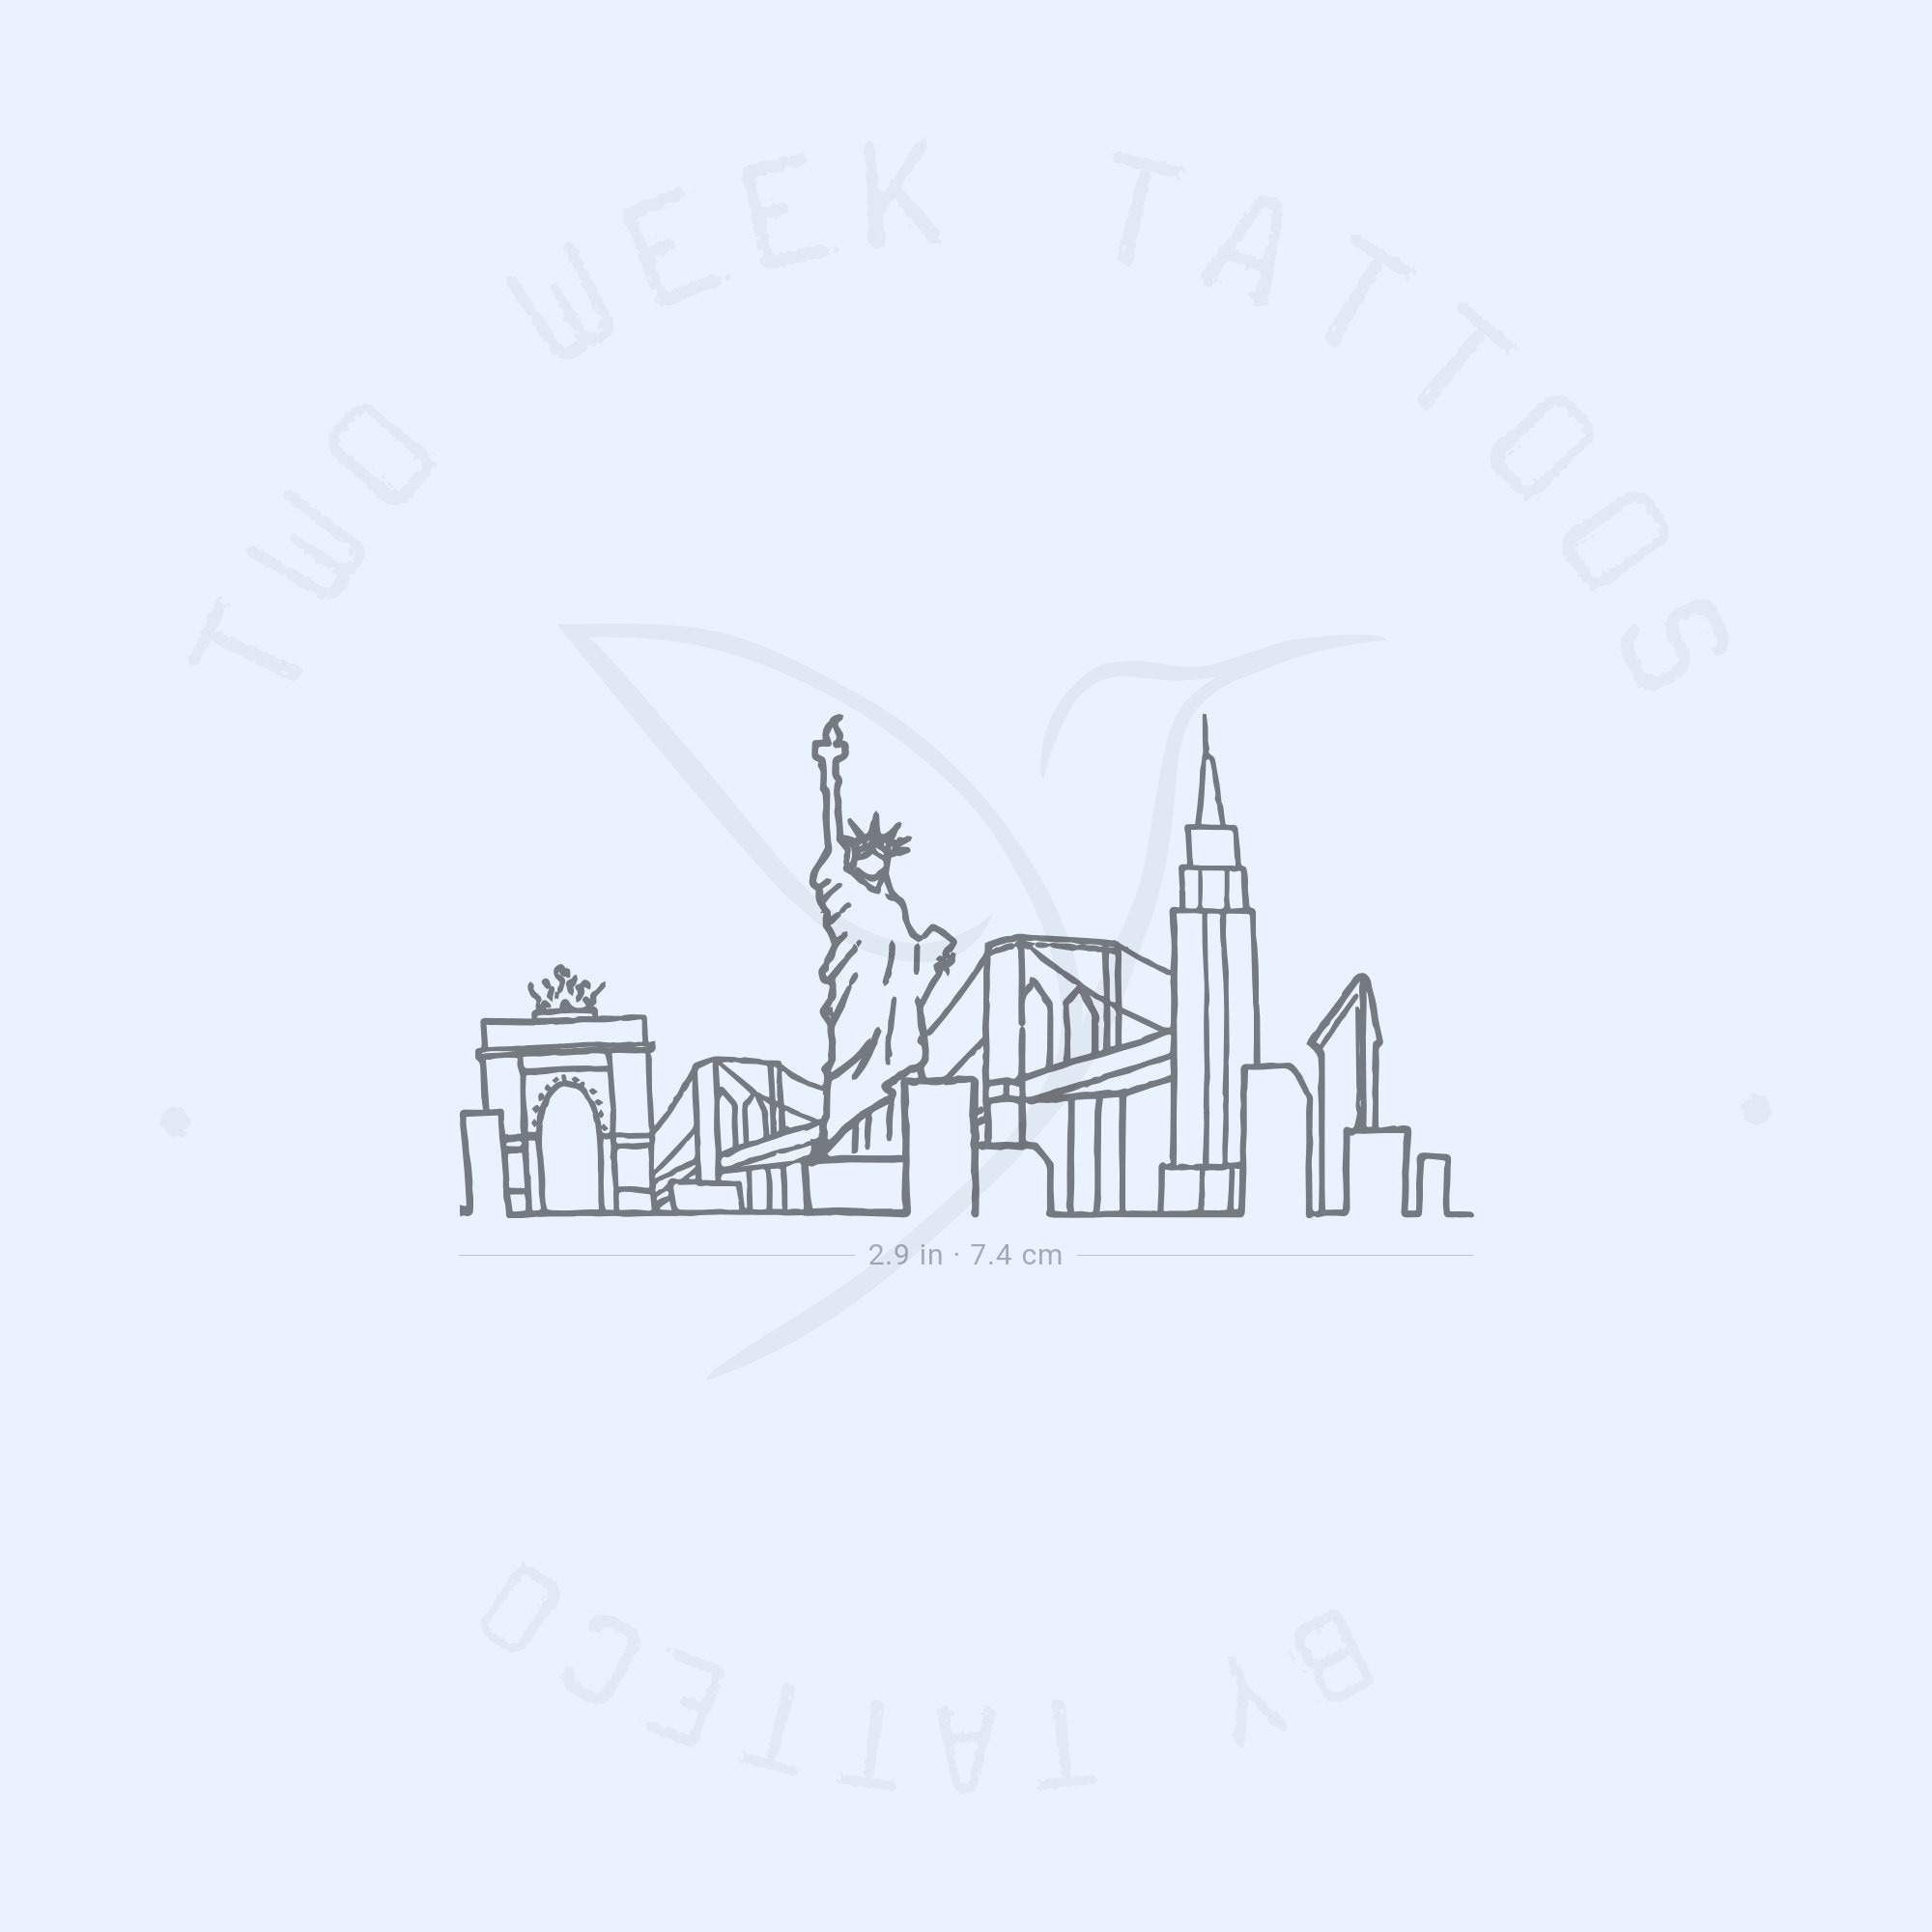 70 City Skyline Tattoo Designs For Men - Downtown Ink Ideas